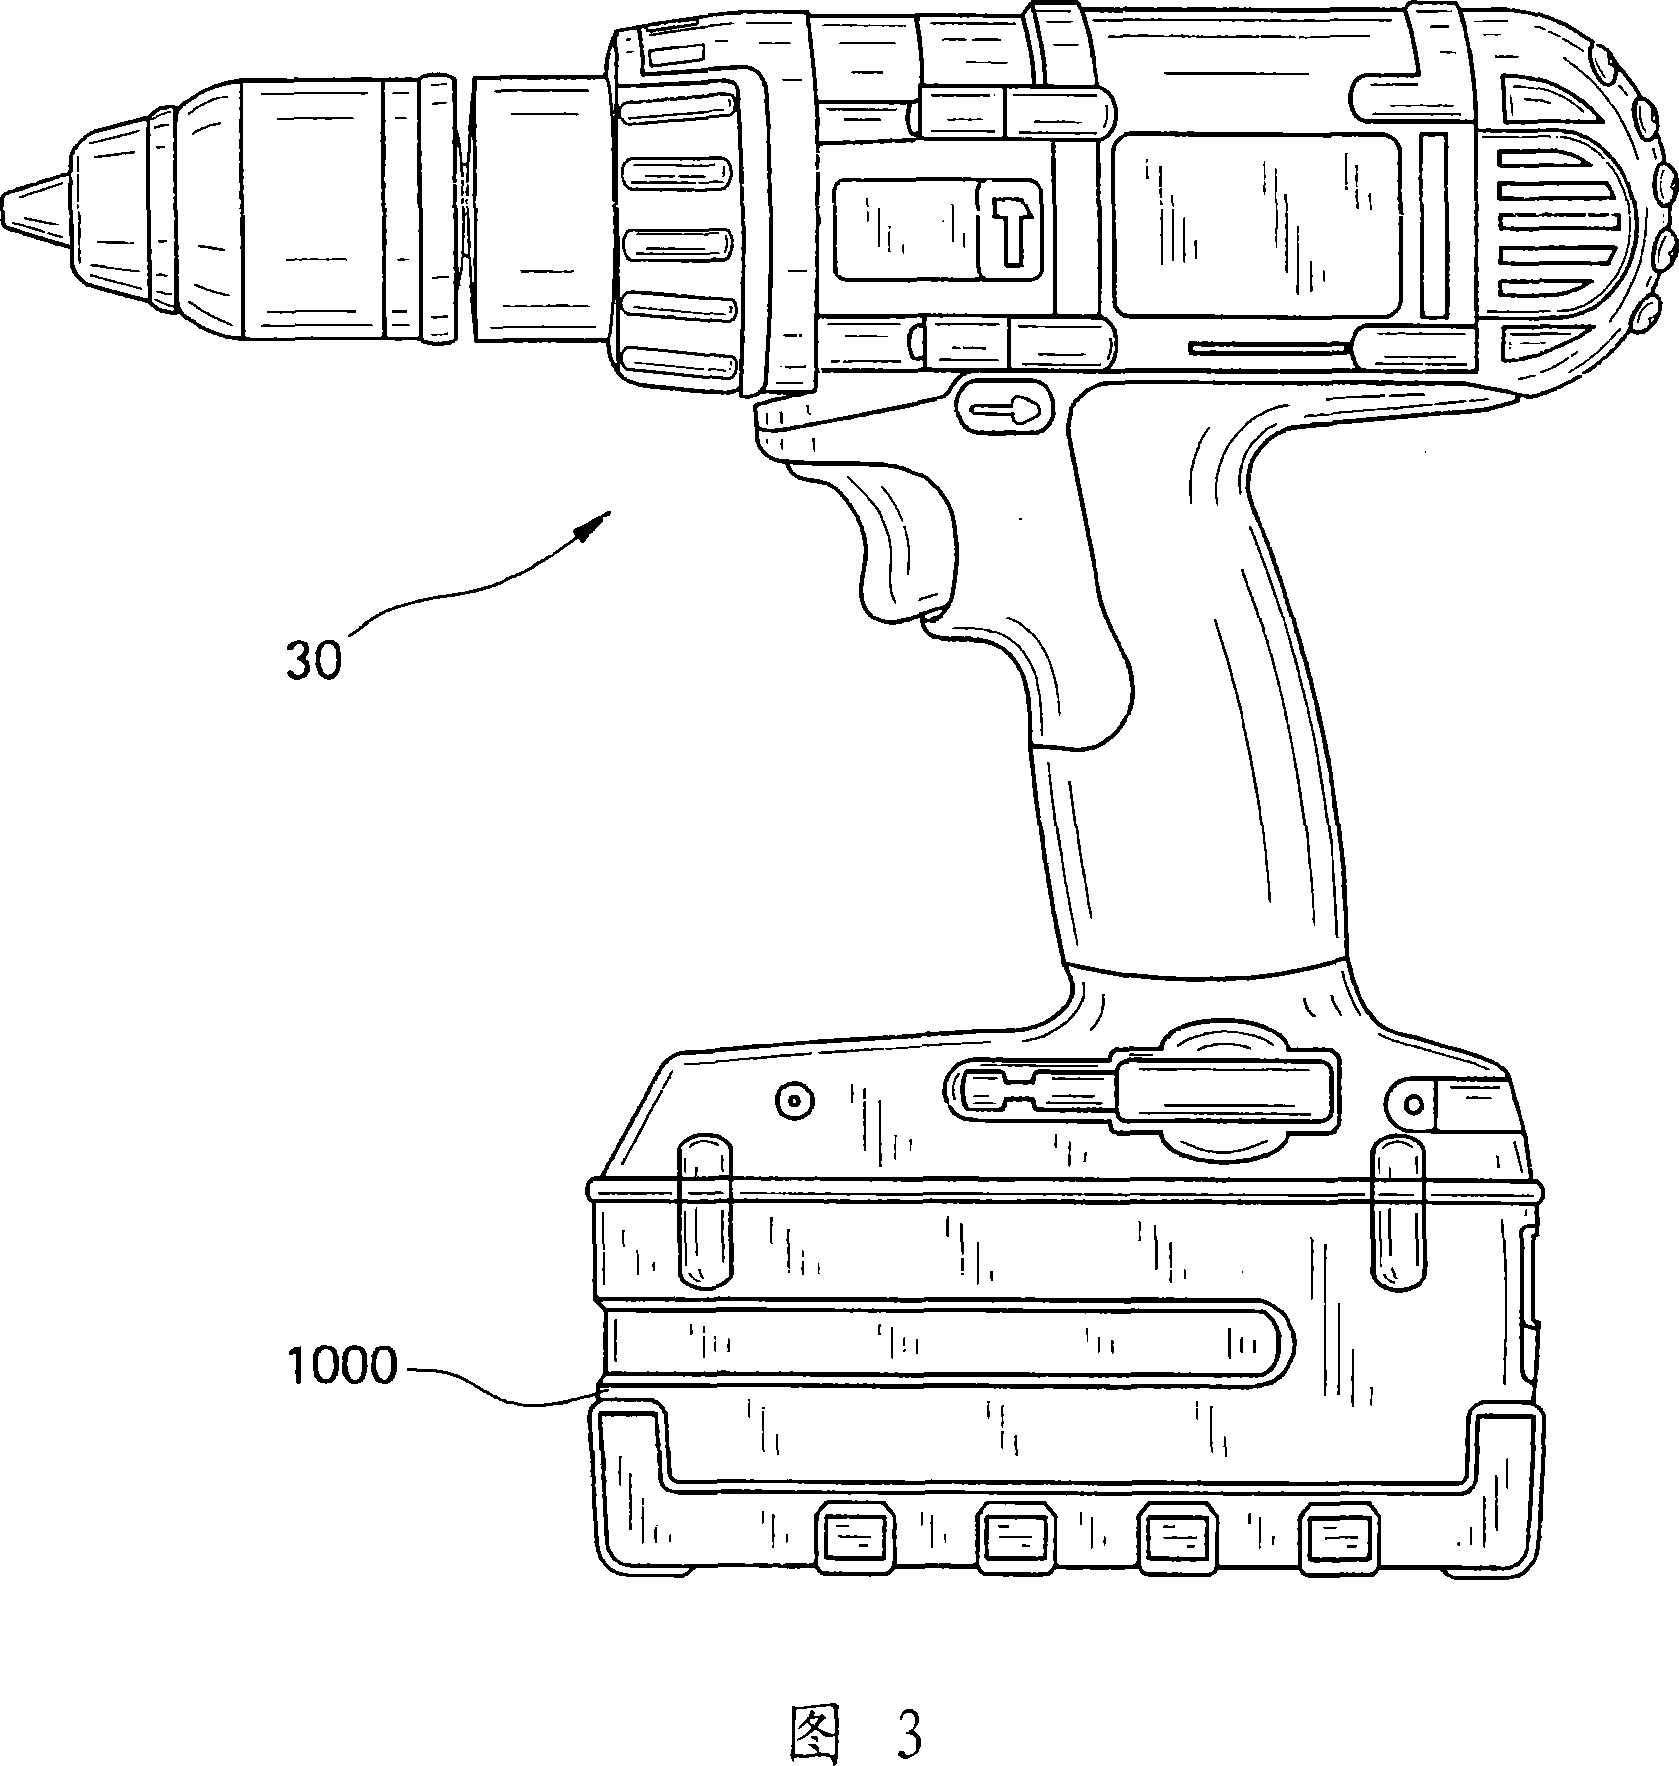 Methods of charging battery packs for cordless power tool systems